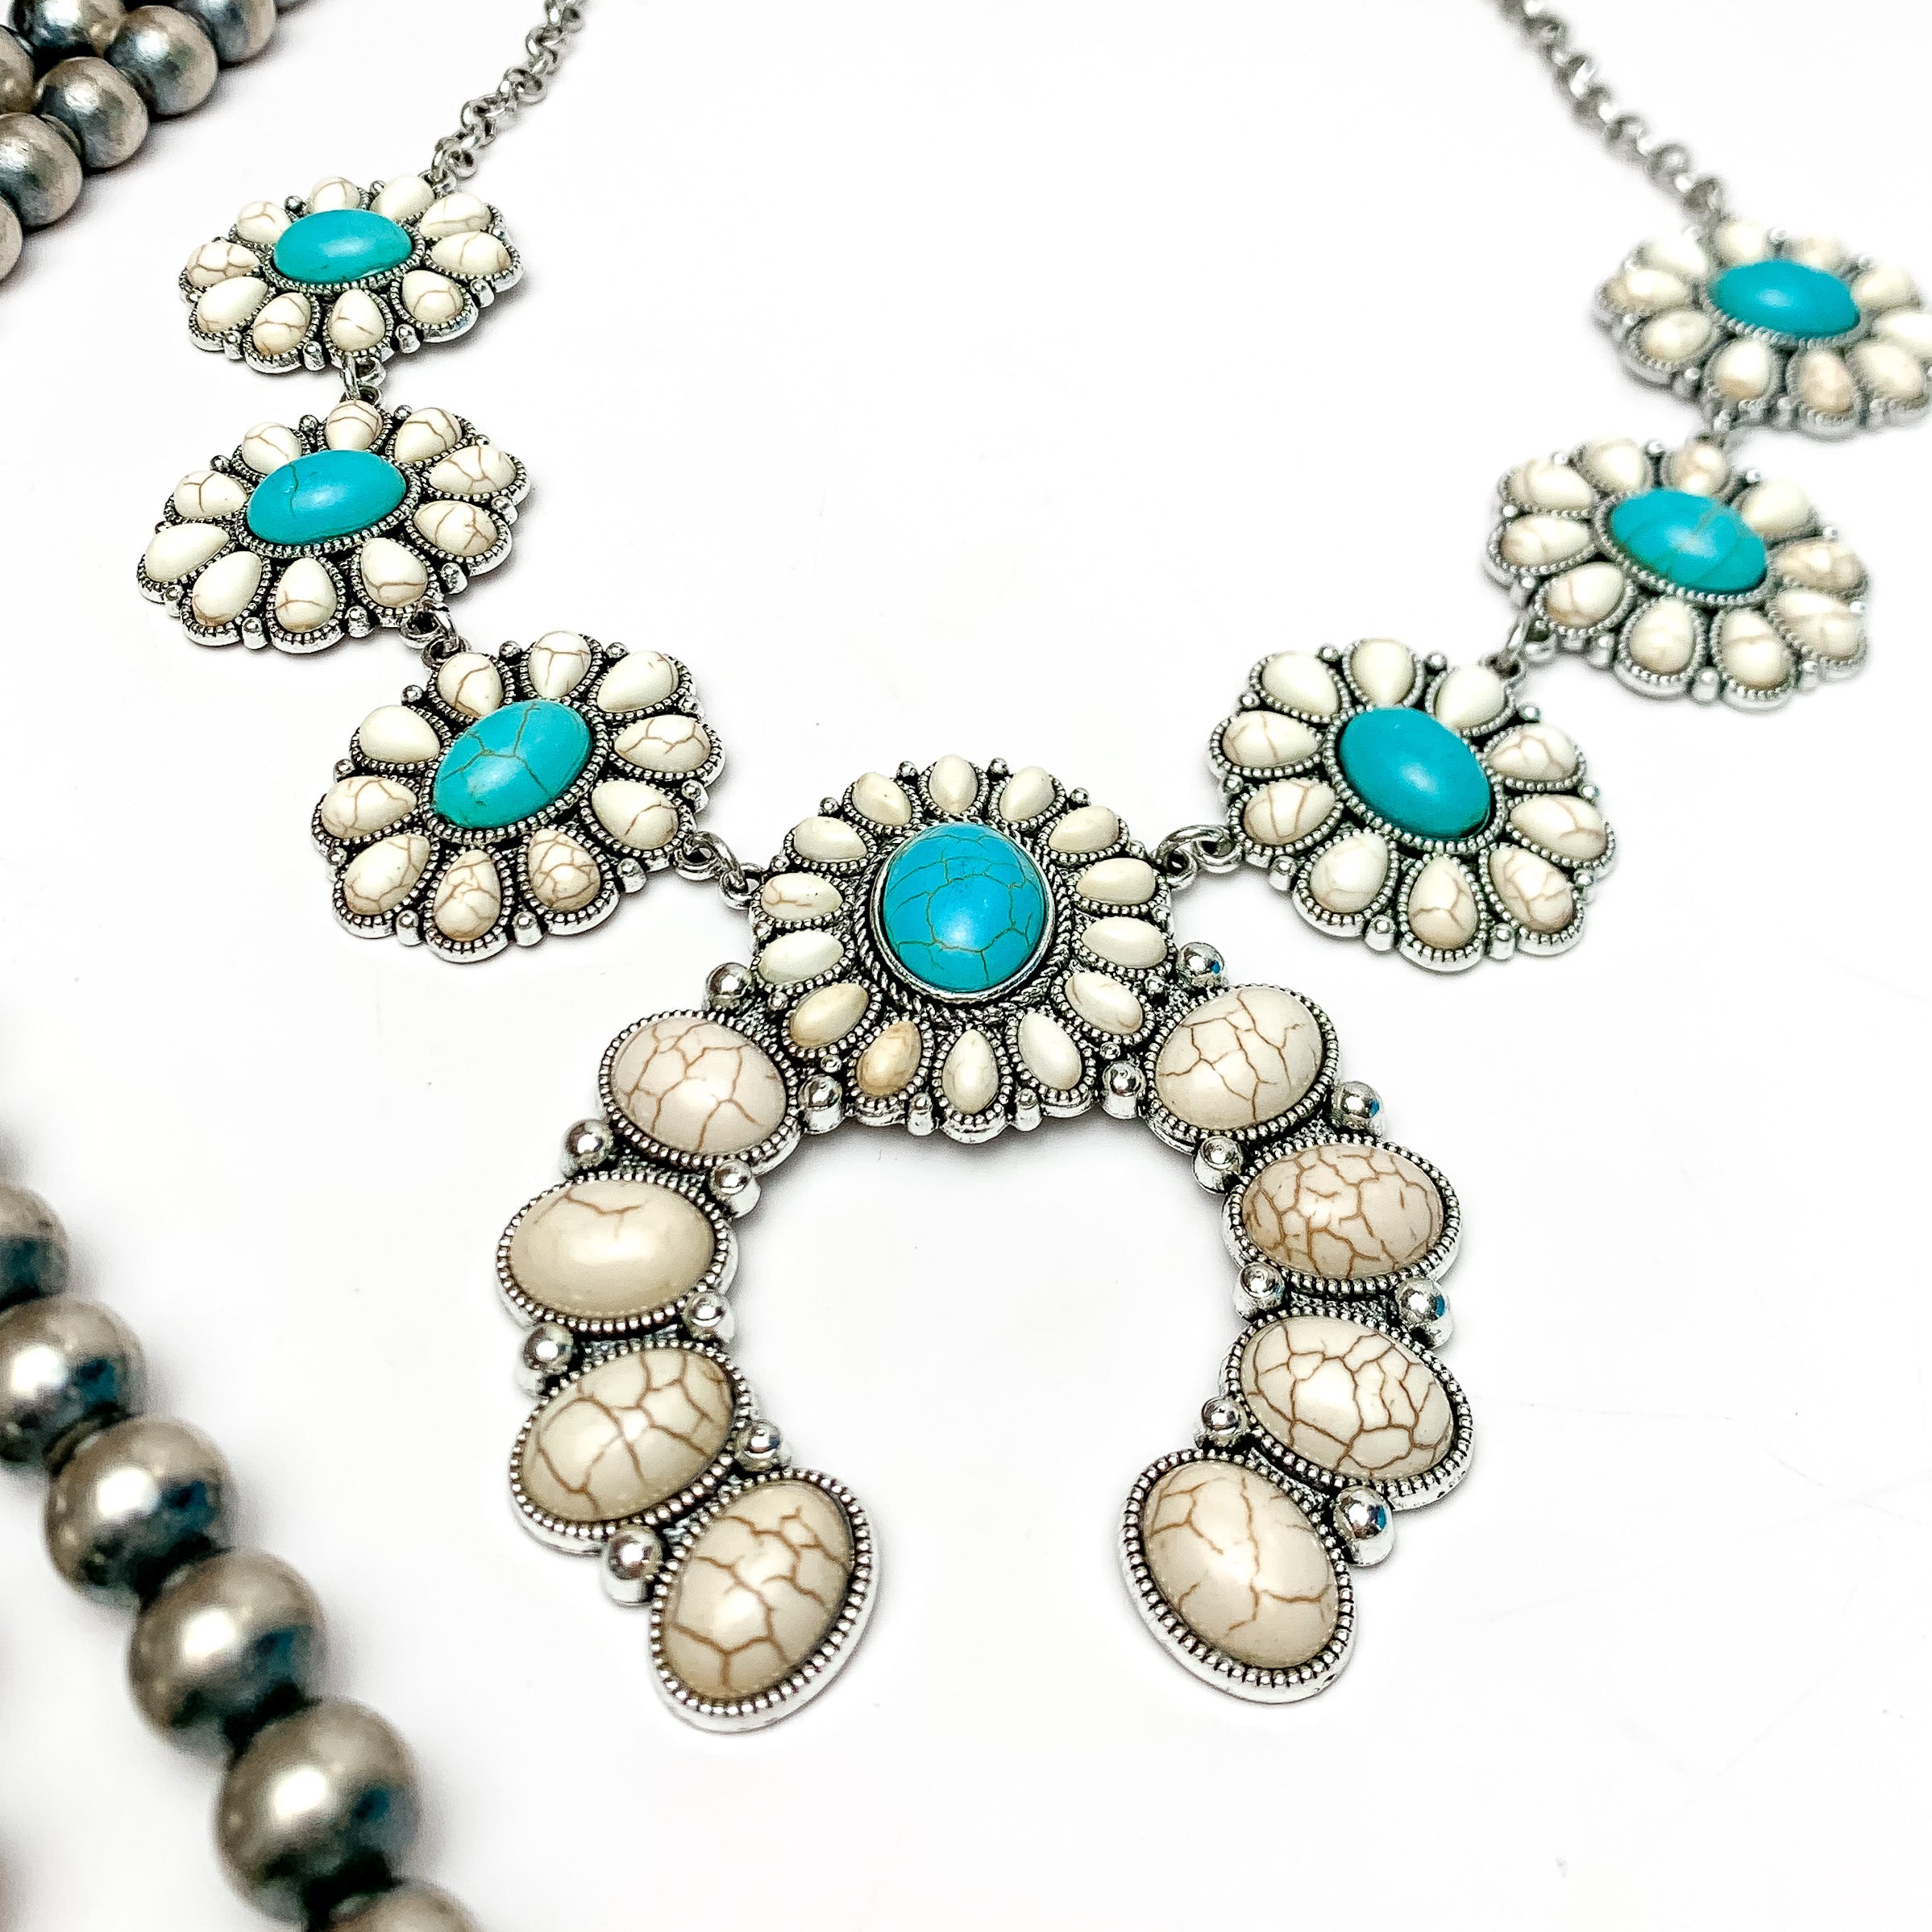 The Western Way Squash Blossom Necklace in Turquoise Blue and Ivory - Giddy Up Glamour Boutique